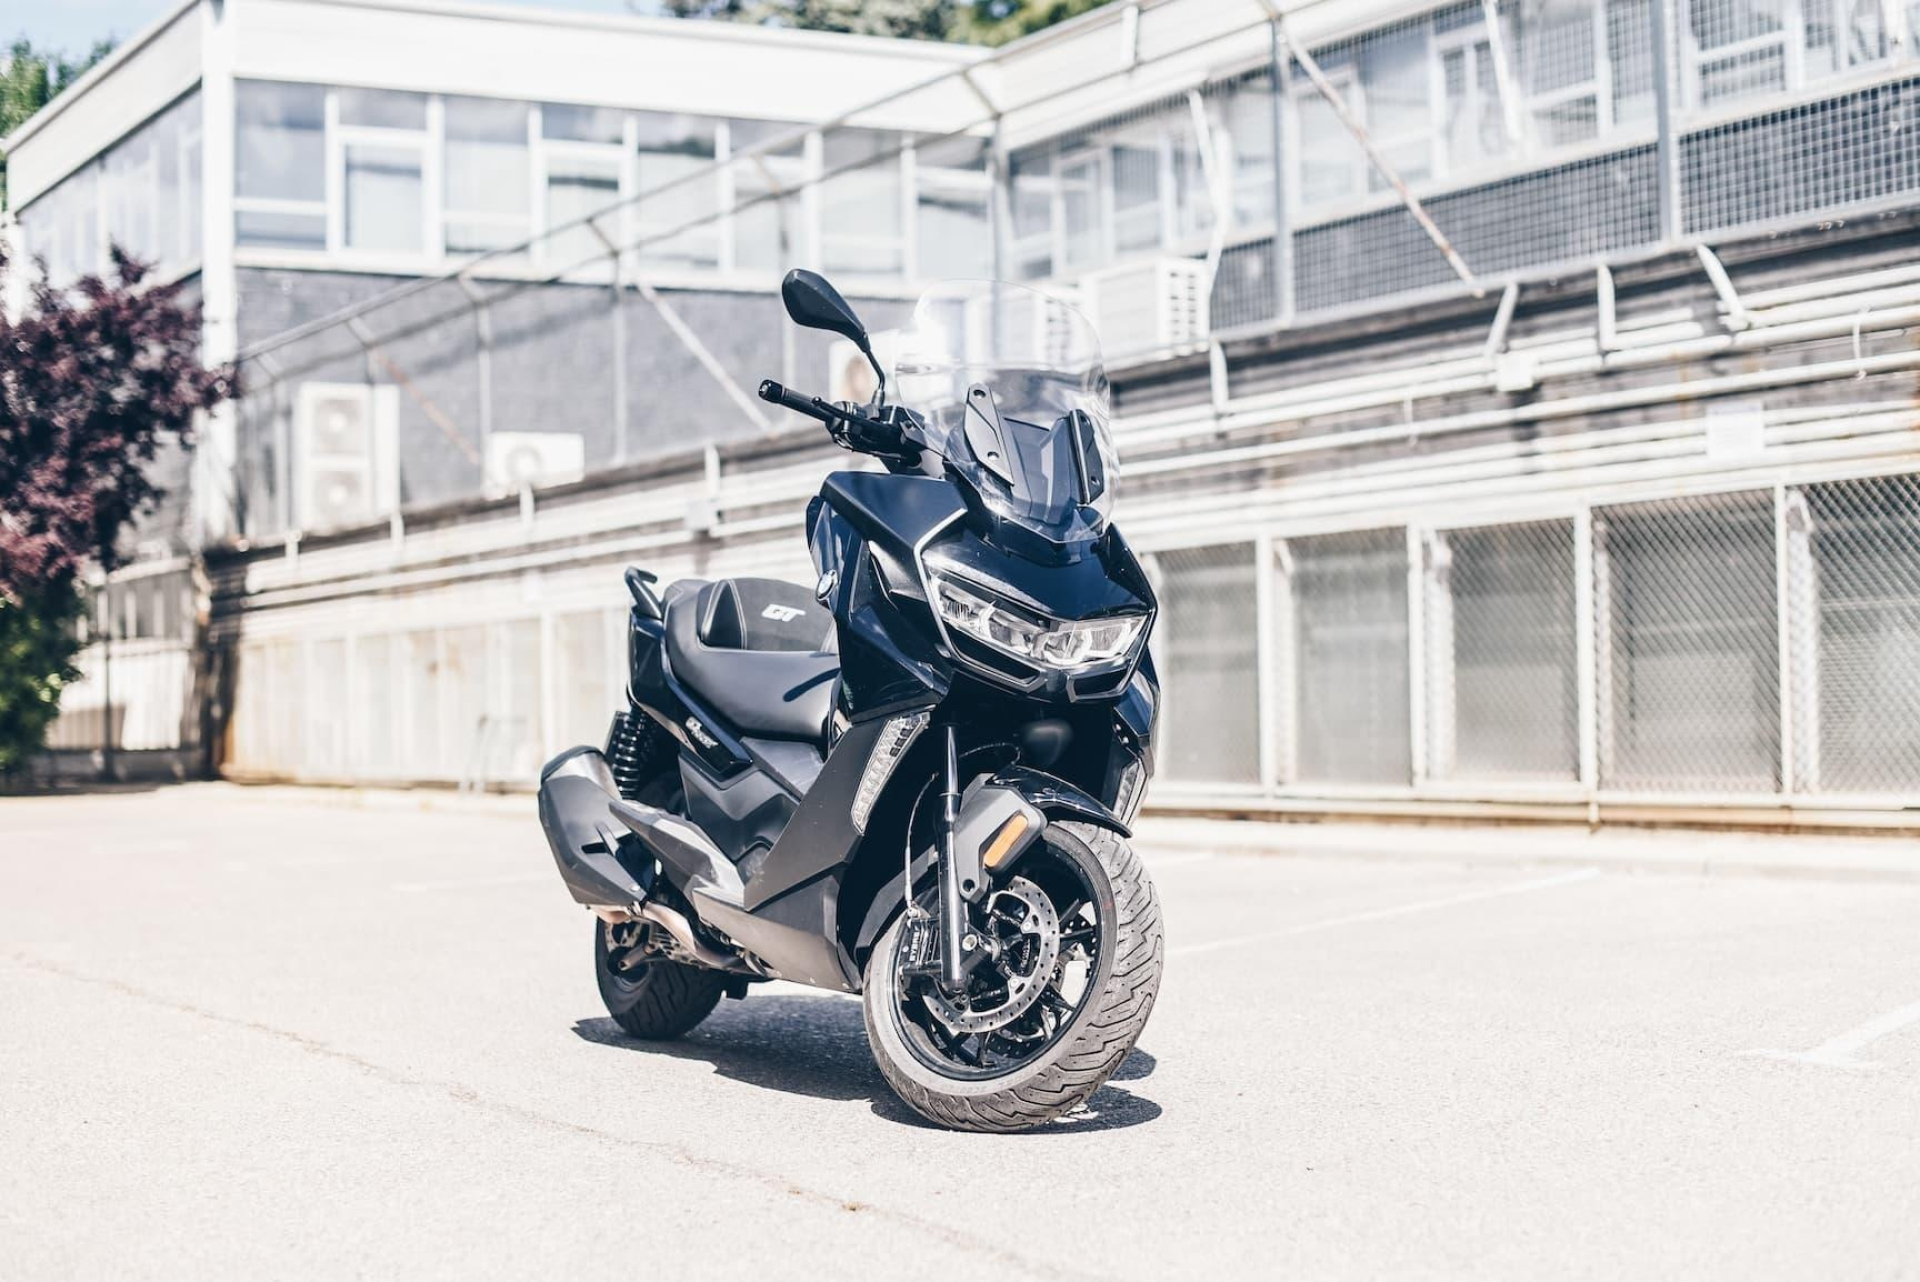 BMW C 400 GT, Excellent purchase option, Practical and reliable, Daily ride companion, 1920x1290 HD Desktop